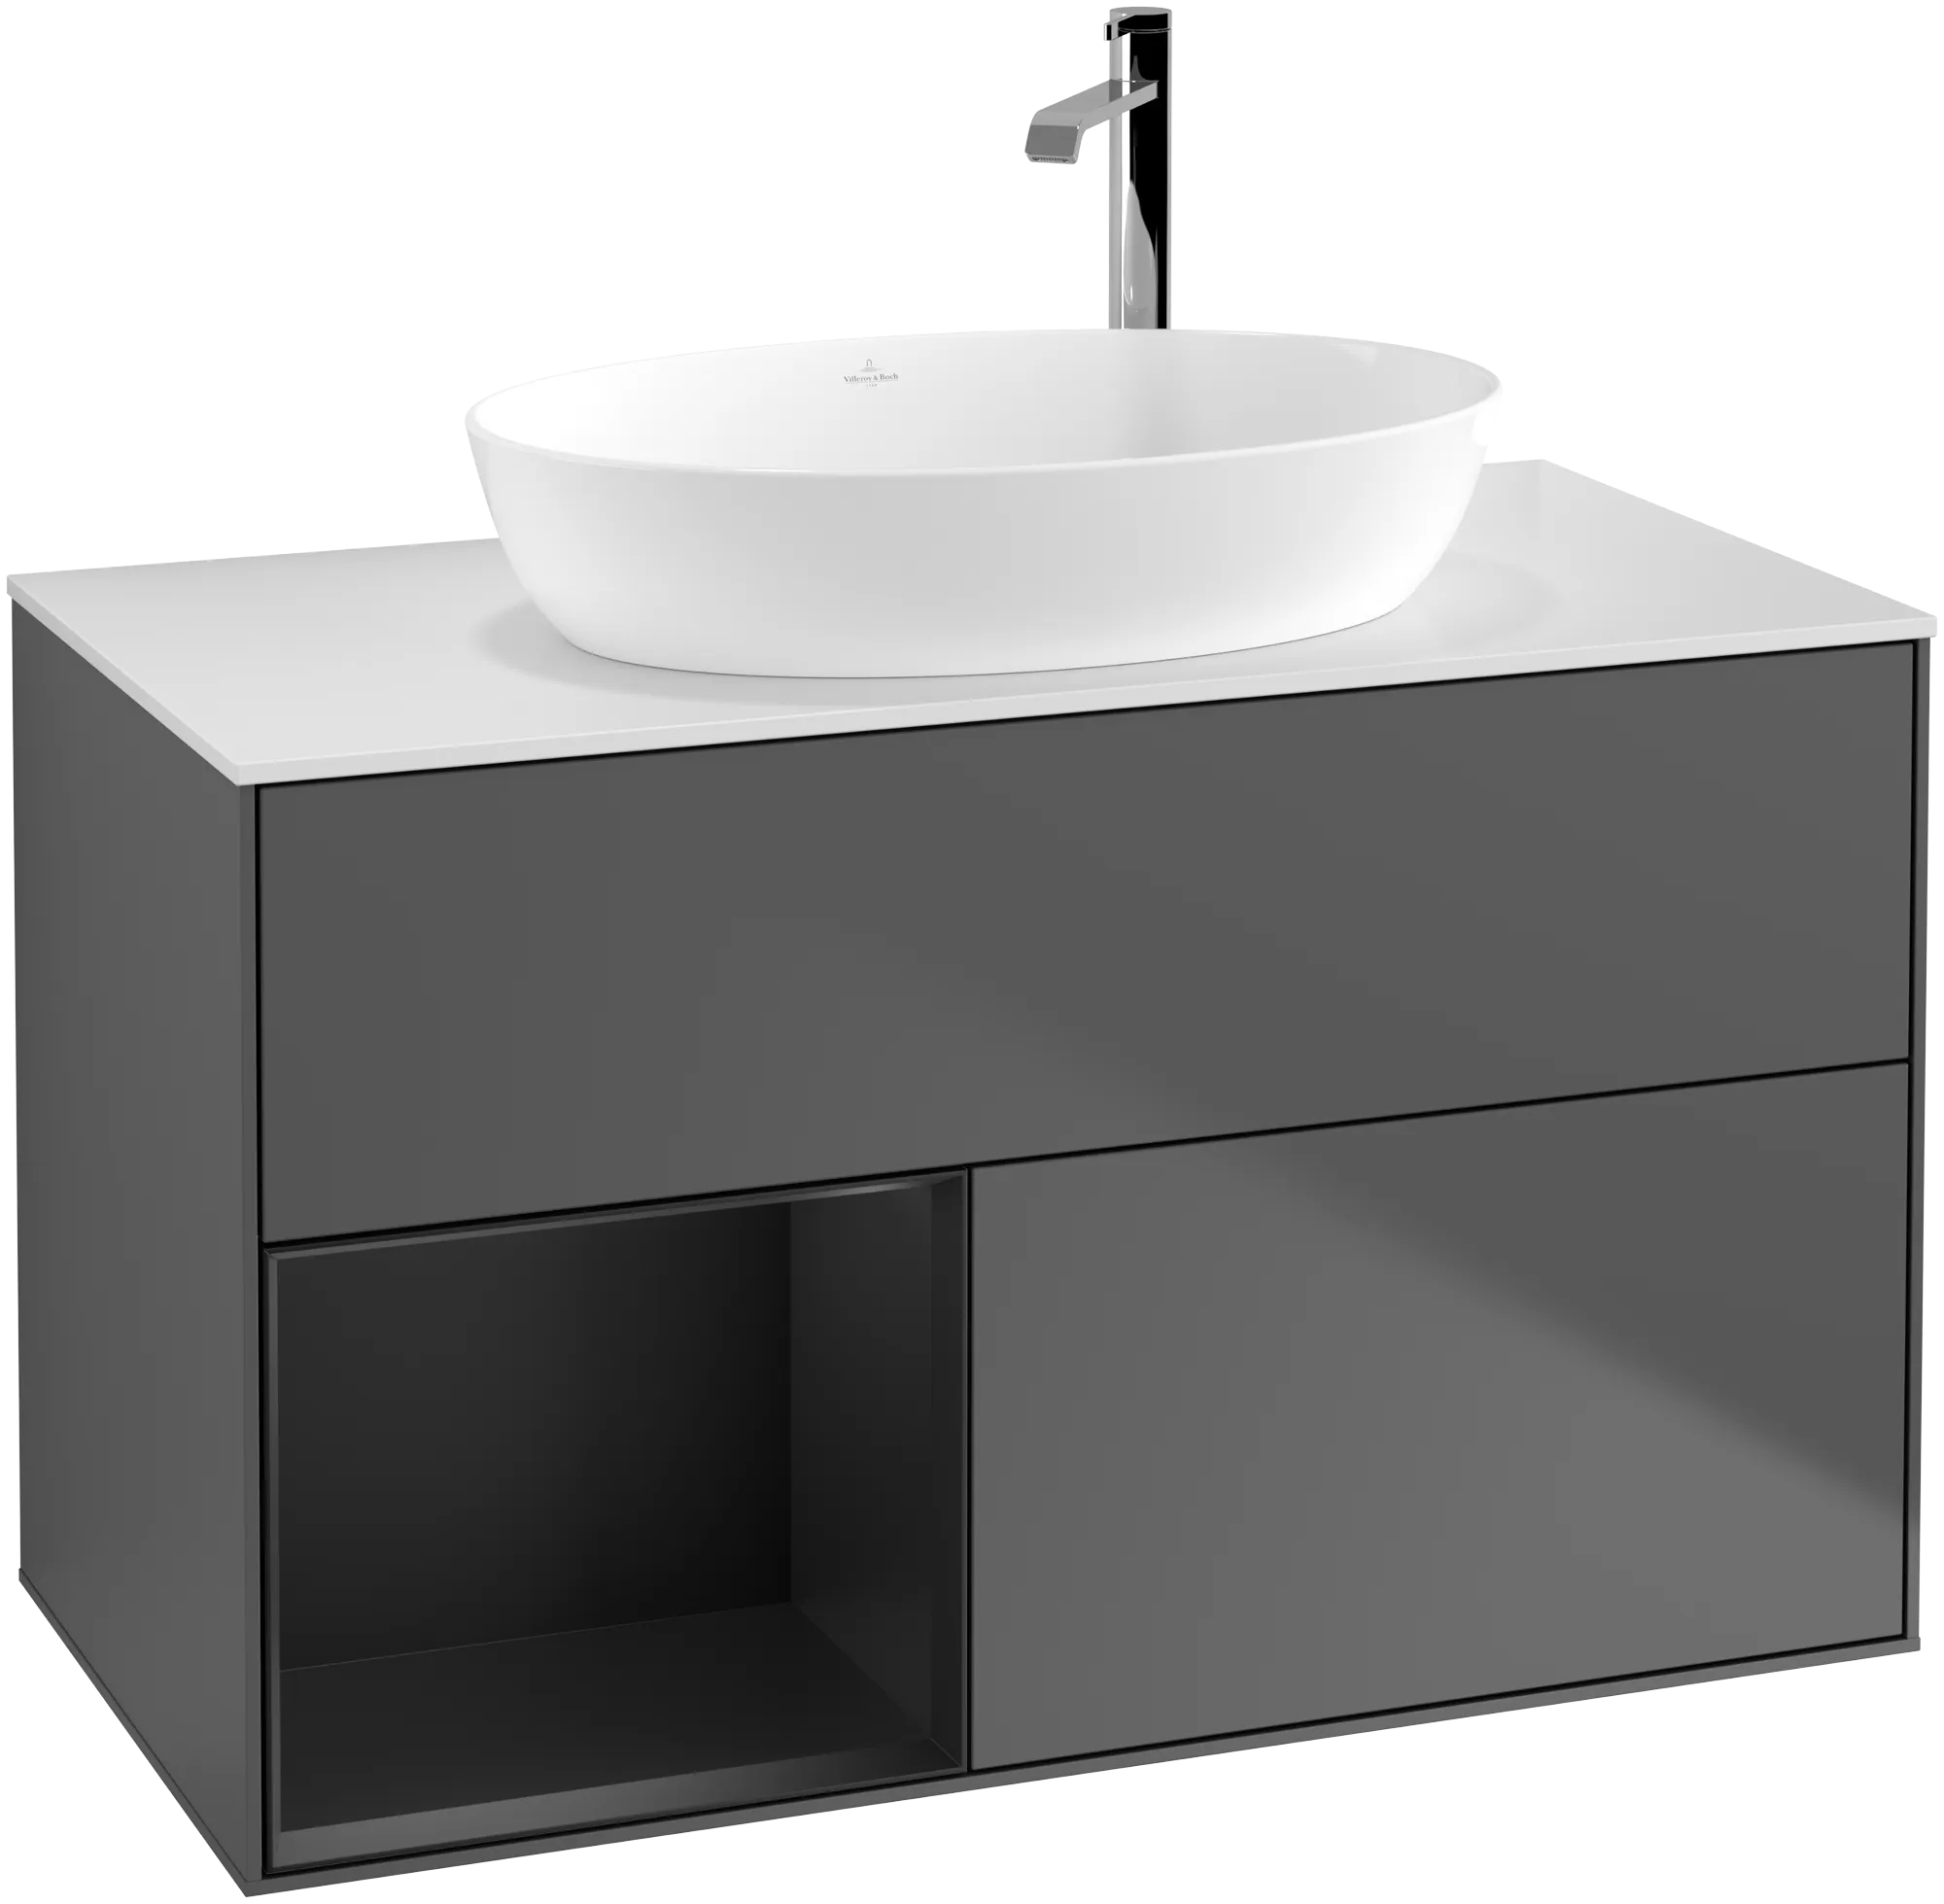 VILLEROY BOCH Finion Vanity unit, with lighting, 2 pull-out compartments, 1000 x 603 x 501 mm, Anthracite Matt Lacquer / Black Matt Lacquer / Glass White Matt #G891PDGK resmi